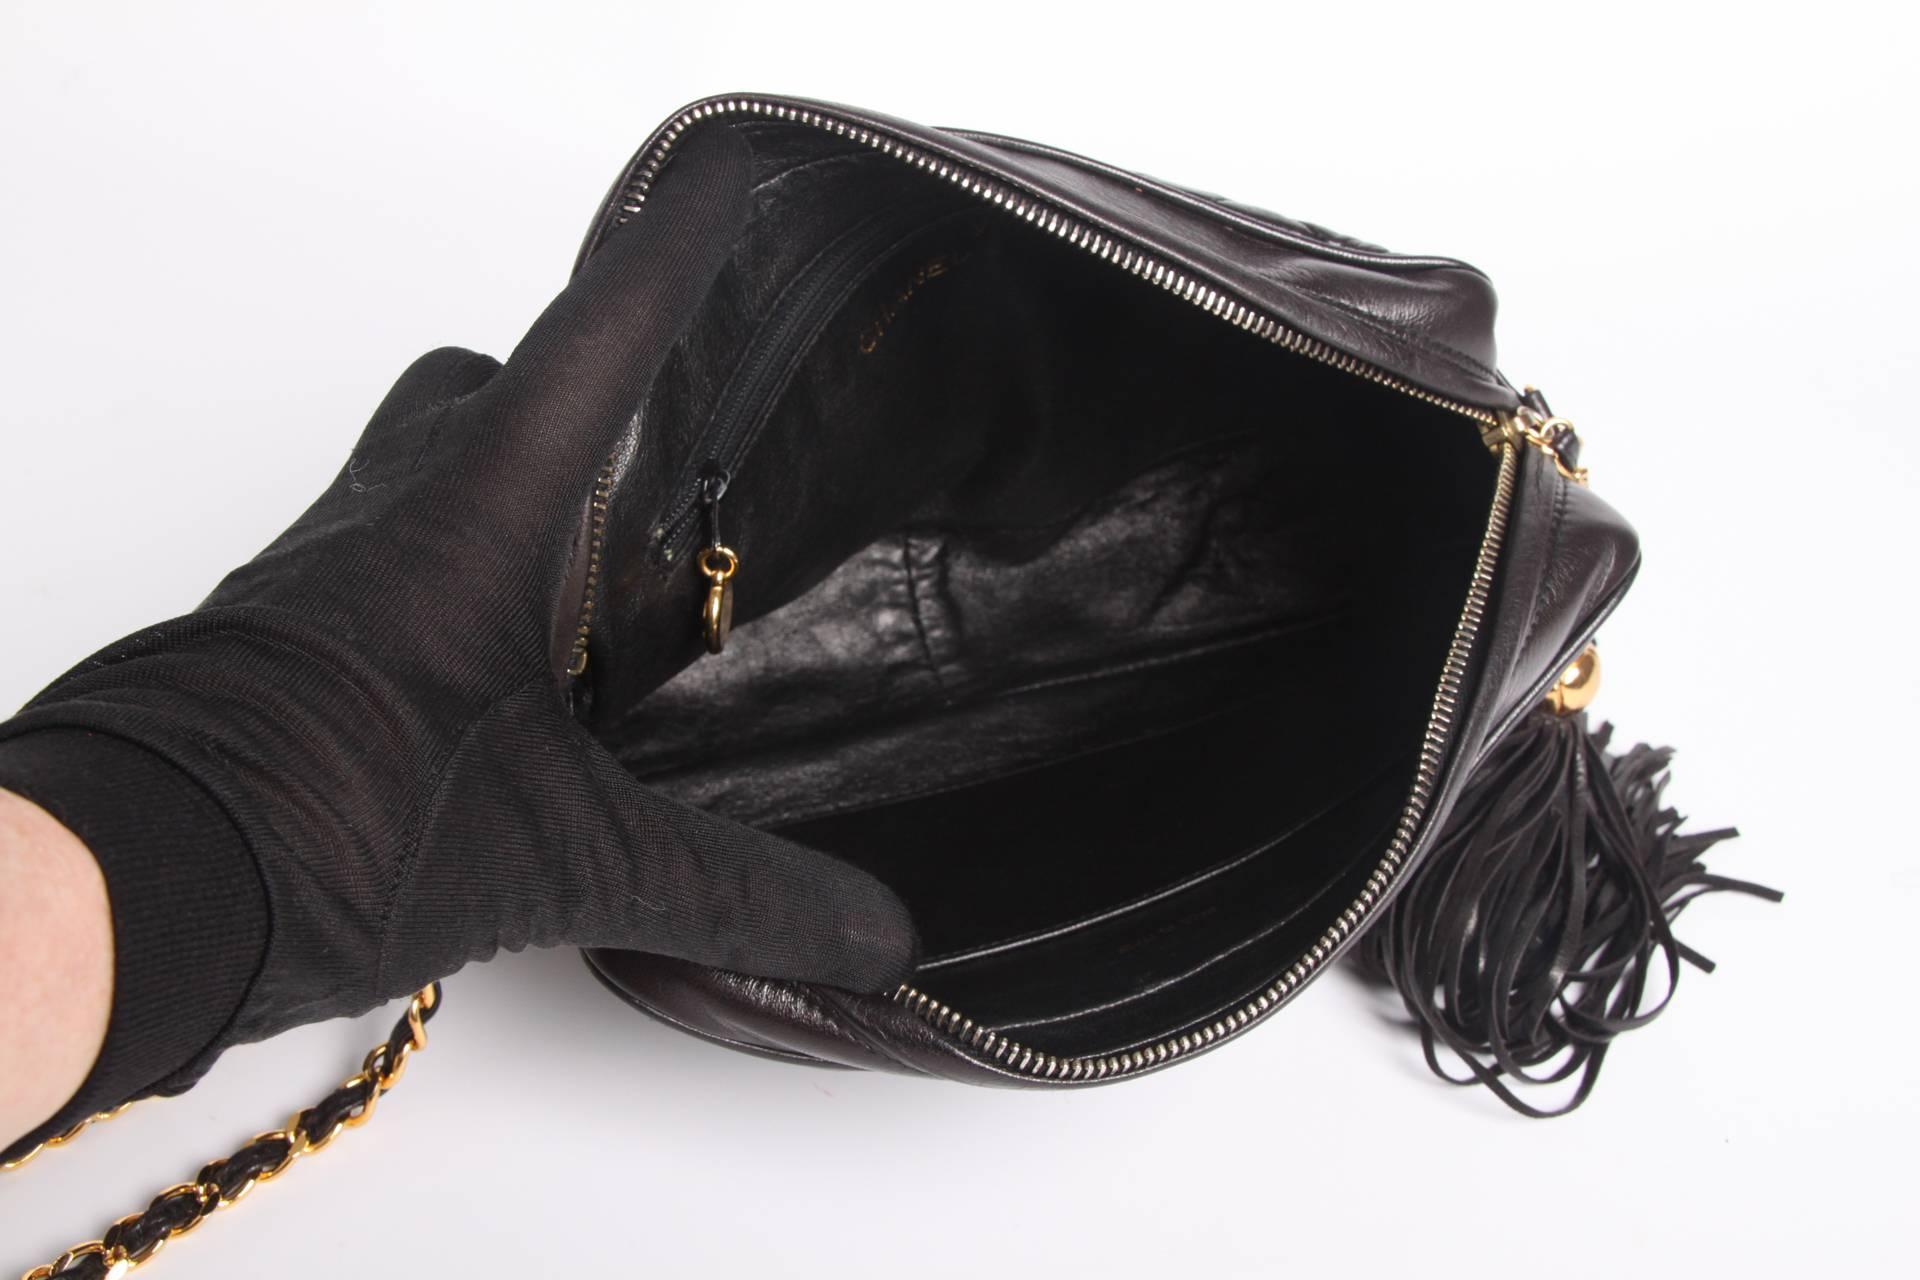 Yes!! A vintage Camera Bag by Chanel from 1995 in supple black qulted leather.

This bag has a very handy size and top zip closure. A large leather tassel with gold-tone detailing and CC logo's is hanging down from it. 

At the front of the bag a